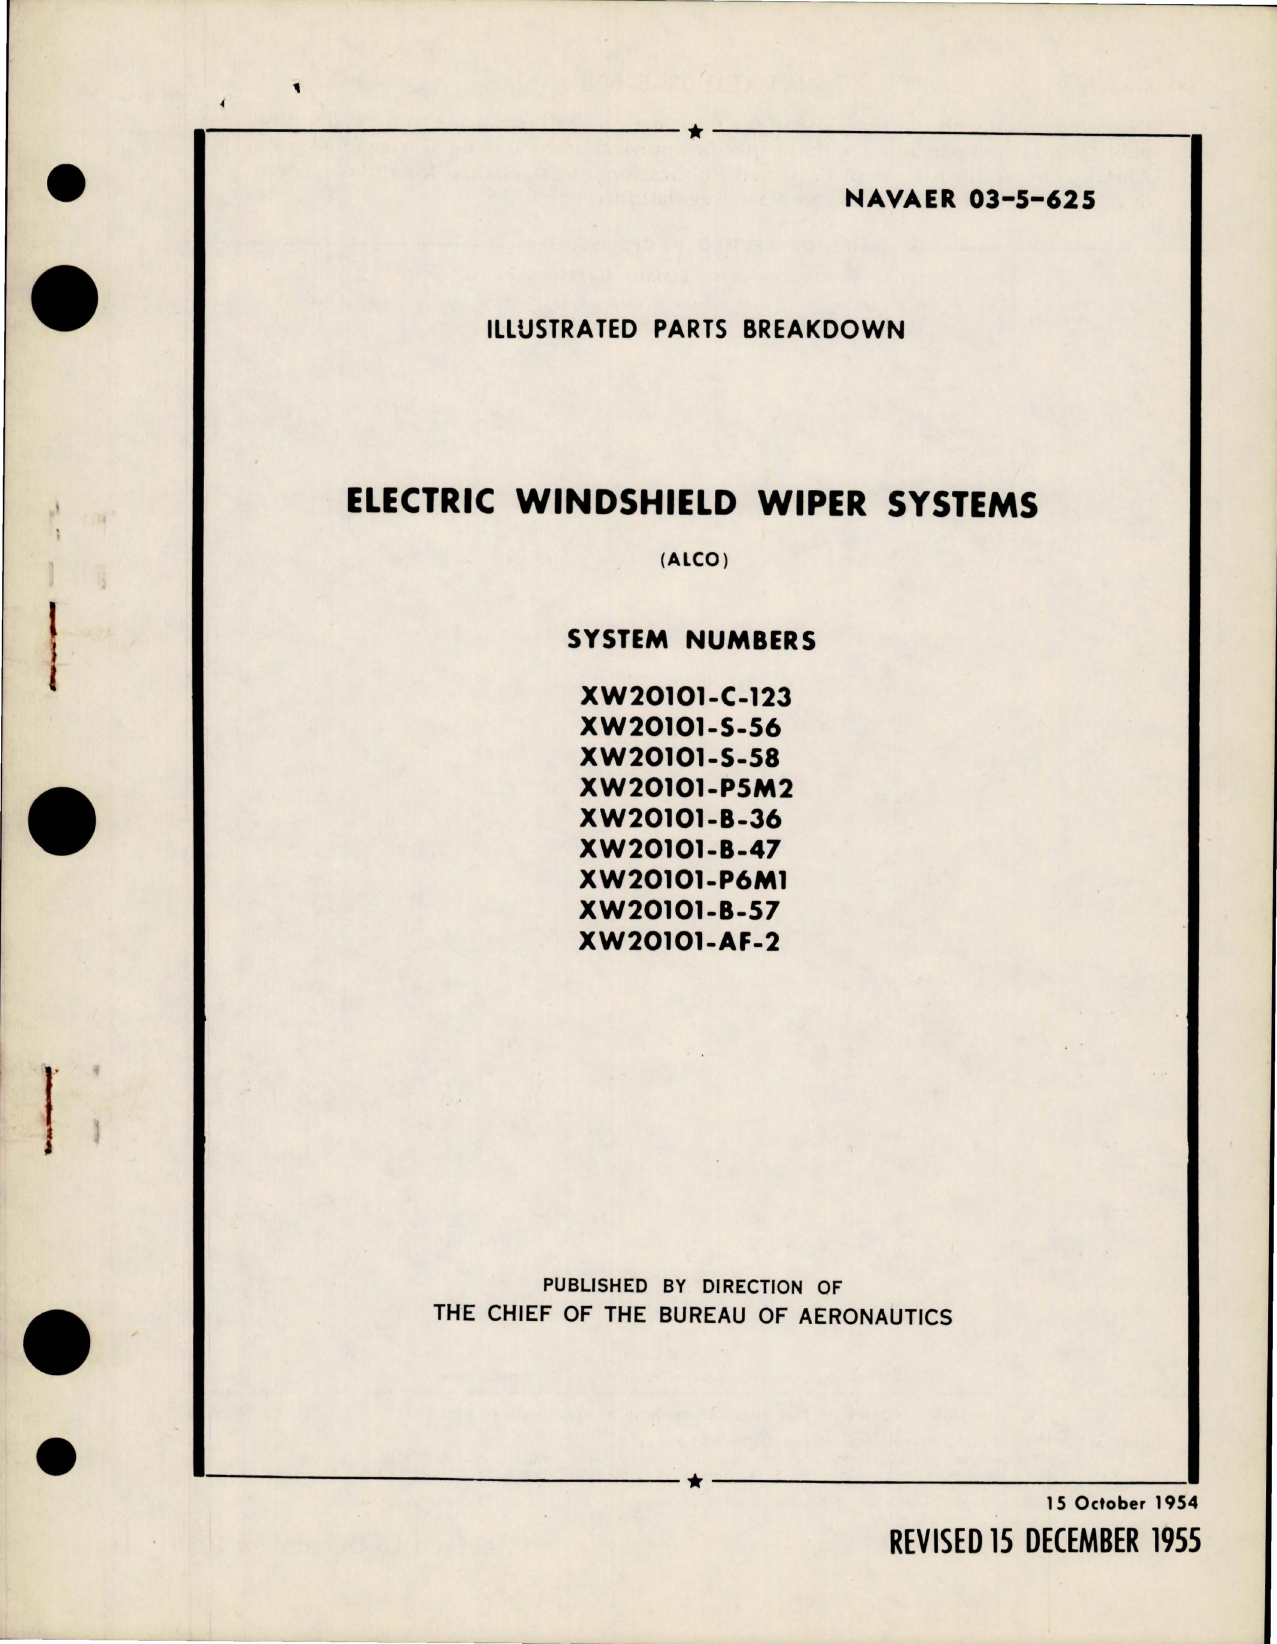 Sample page 1 from AirCorps Library document: Illustrated Parts Breakdown for Electric Windshield Wiper Systems 